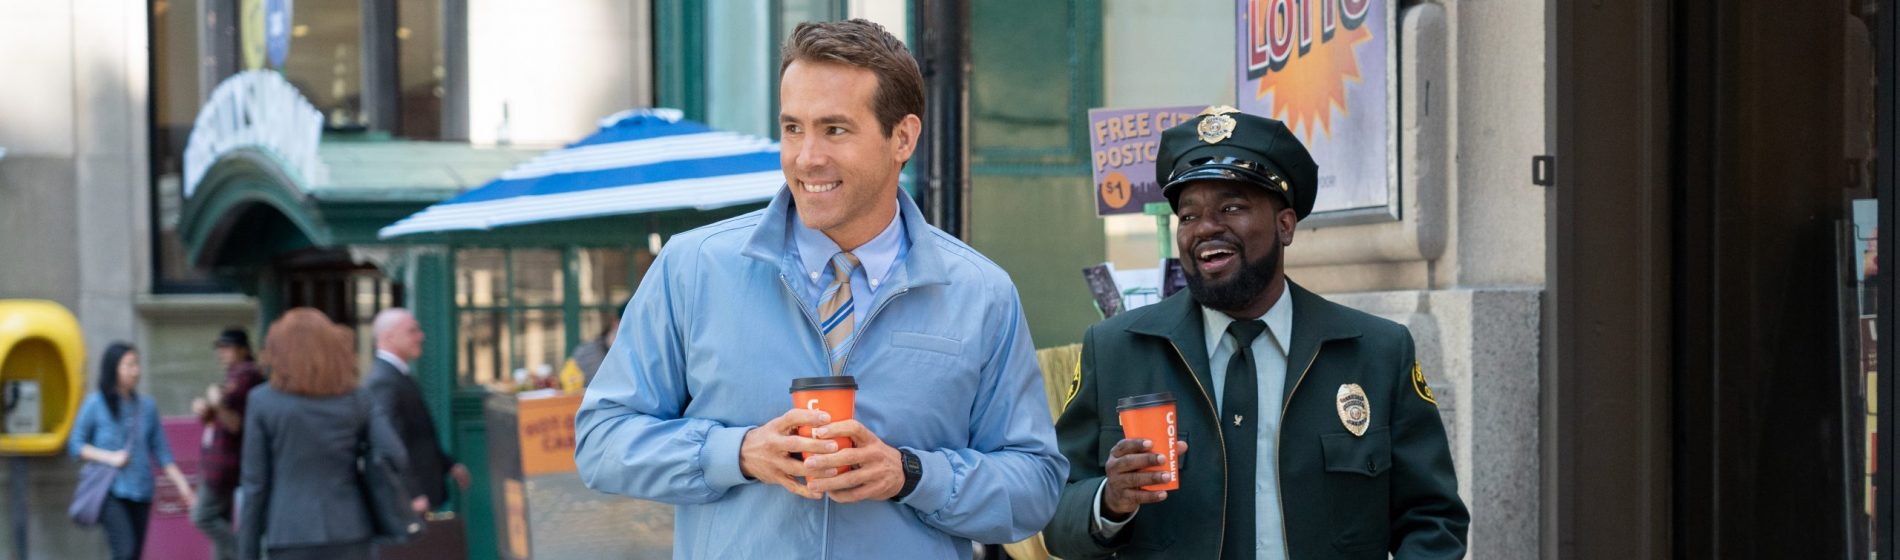 Ryan Reynolds as Guy and Lil Rel Howery as Buddy in Free Guy